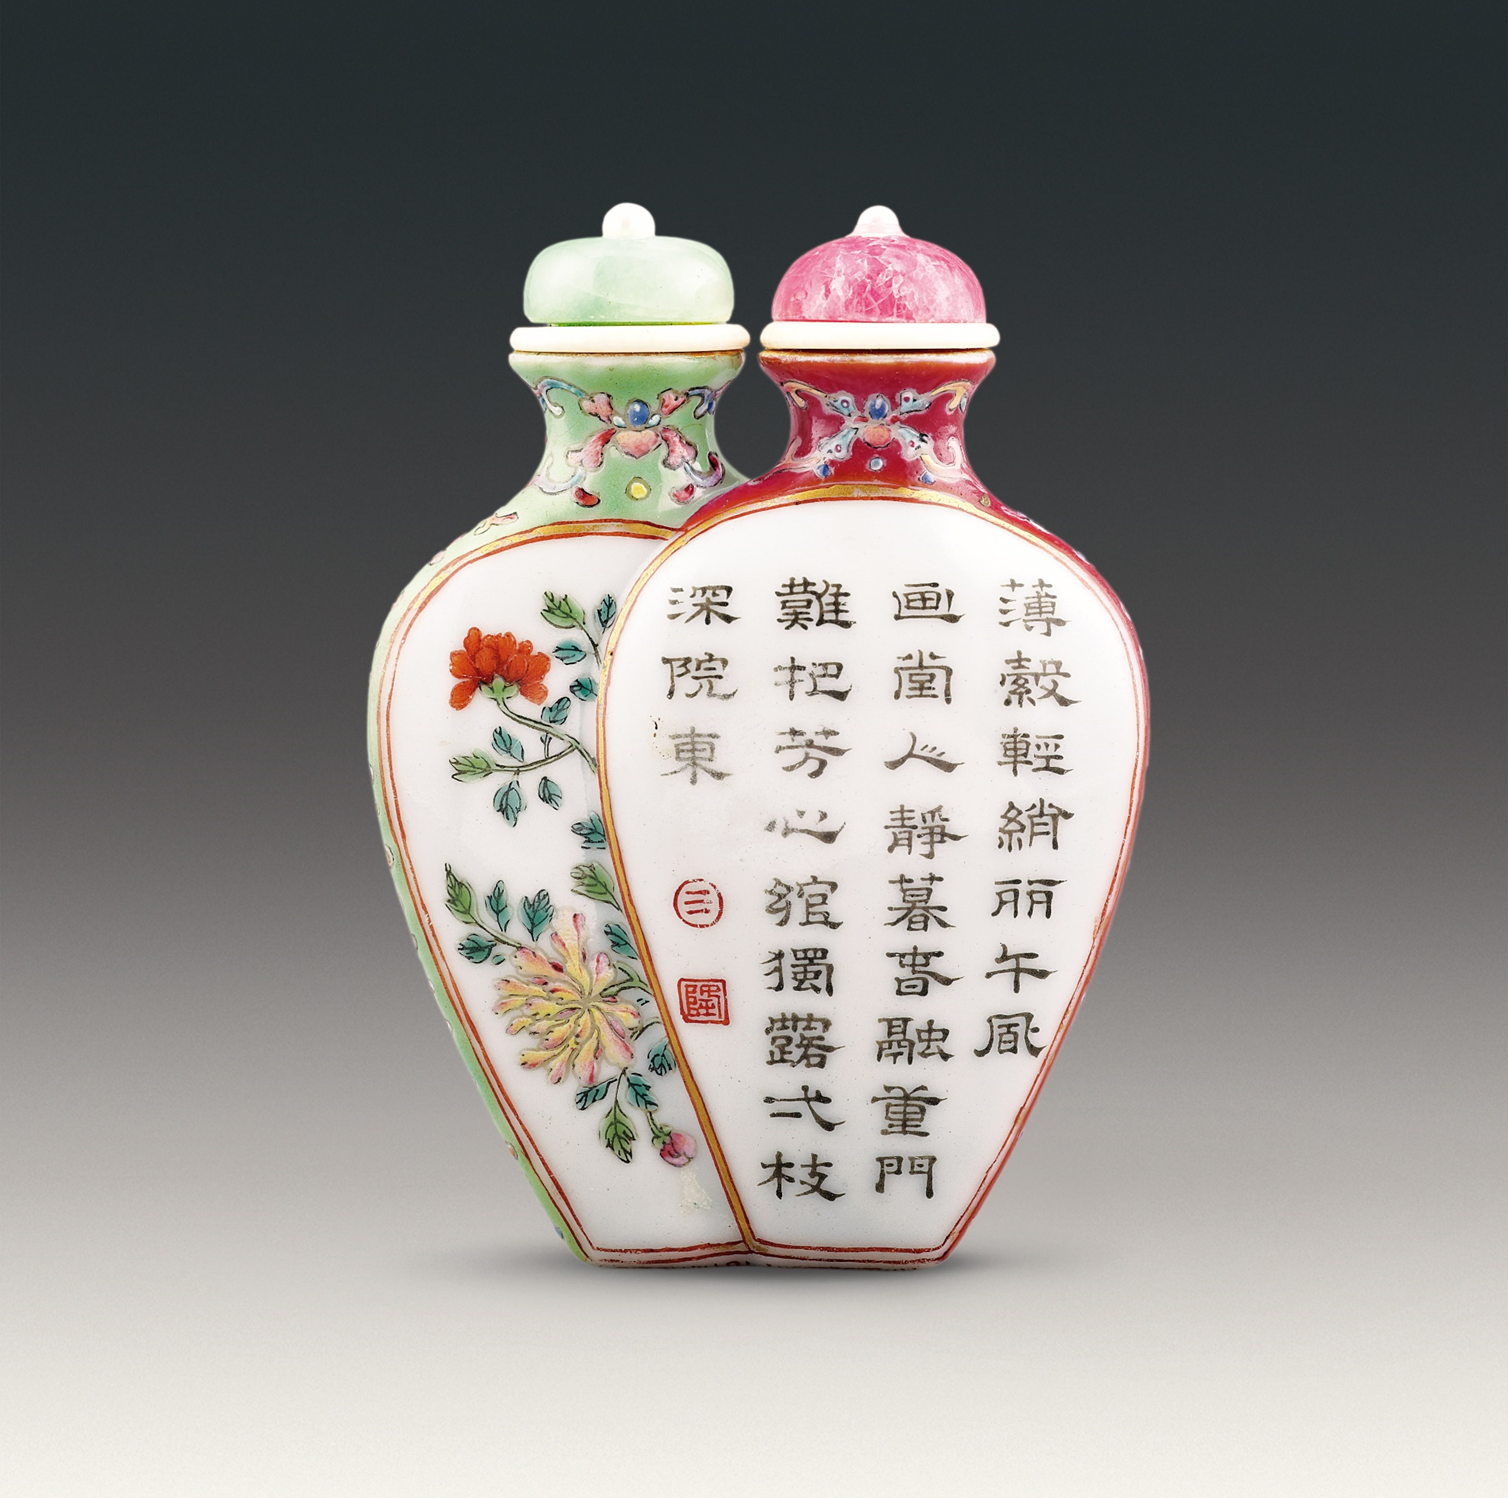 The Hong Kong Museum of Art today (September 28) announced that Christopher and Josephine Sin generously donated nearly 500 pieces of Chinese snuff bottles from the Fuyun Xuan Collection of Chinese Snuff Bottles for the museum's permanent collection. Picture shows the newly donated coupled-vase-shaped snuff bottle with imperial poem and floral design in "fencai" enamels. The bottle is in the form of a double vase from the imperial kiln of the Qing dynasty, decorated on each side with two sets of reserved panels, within which poems written by Emperor Qianlong are inscribed, encapsulating the emperor's aesthetic taste.